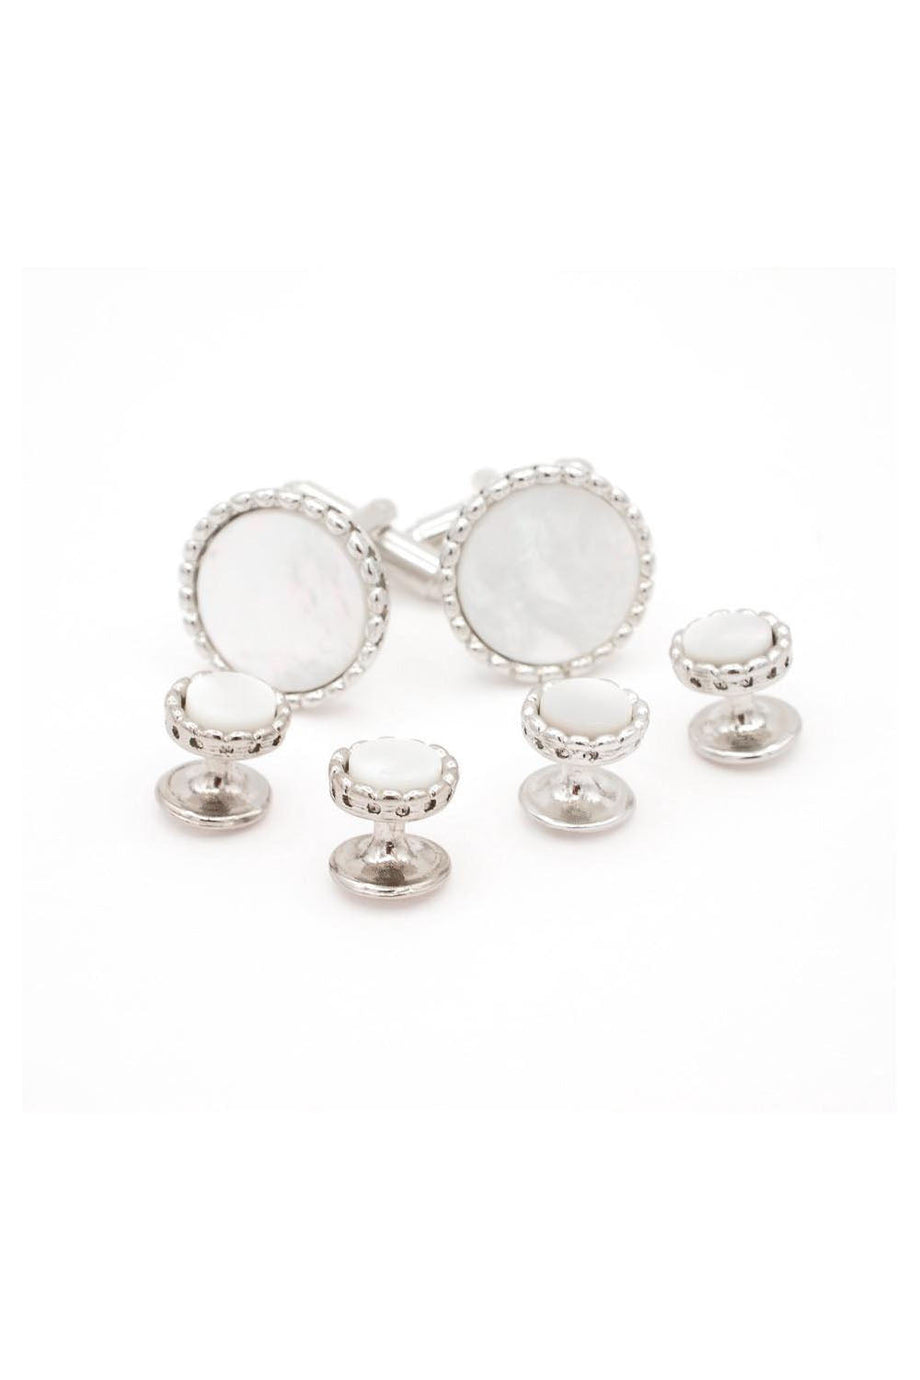 JJ Weston Silver Bead Mother of Pearl Studs and Cufflinks Set